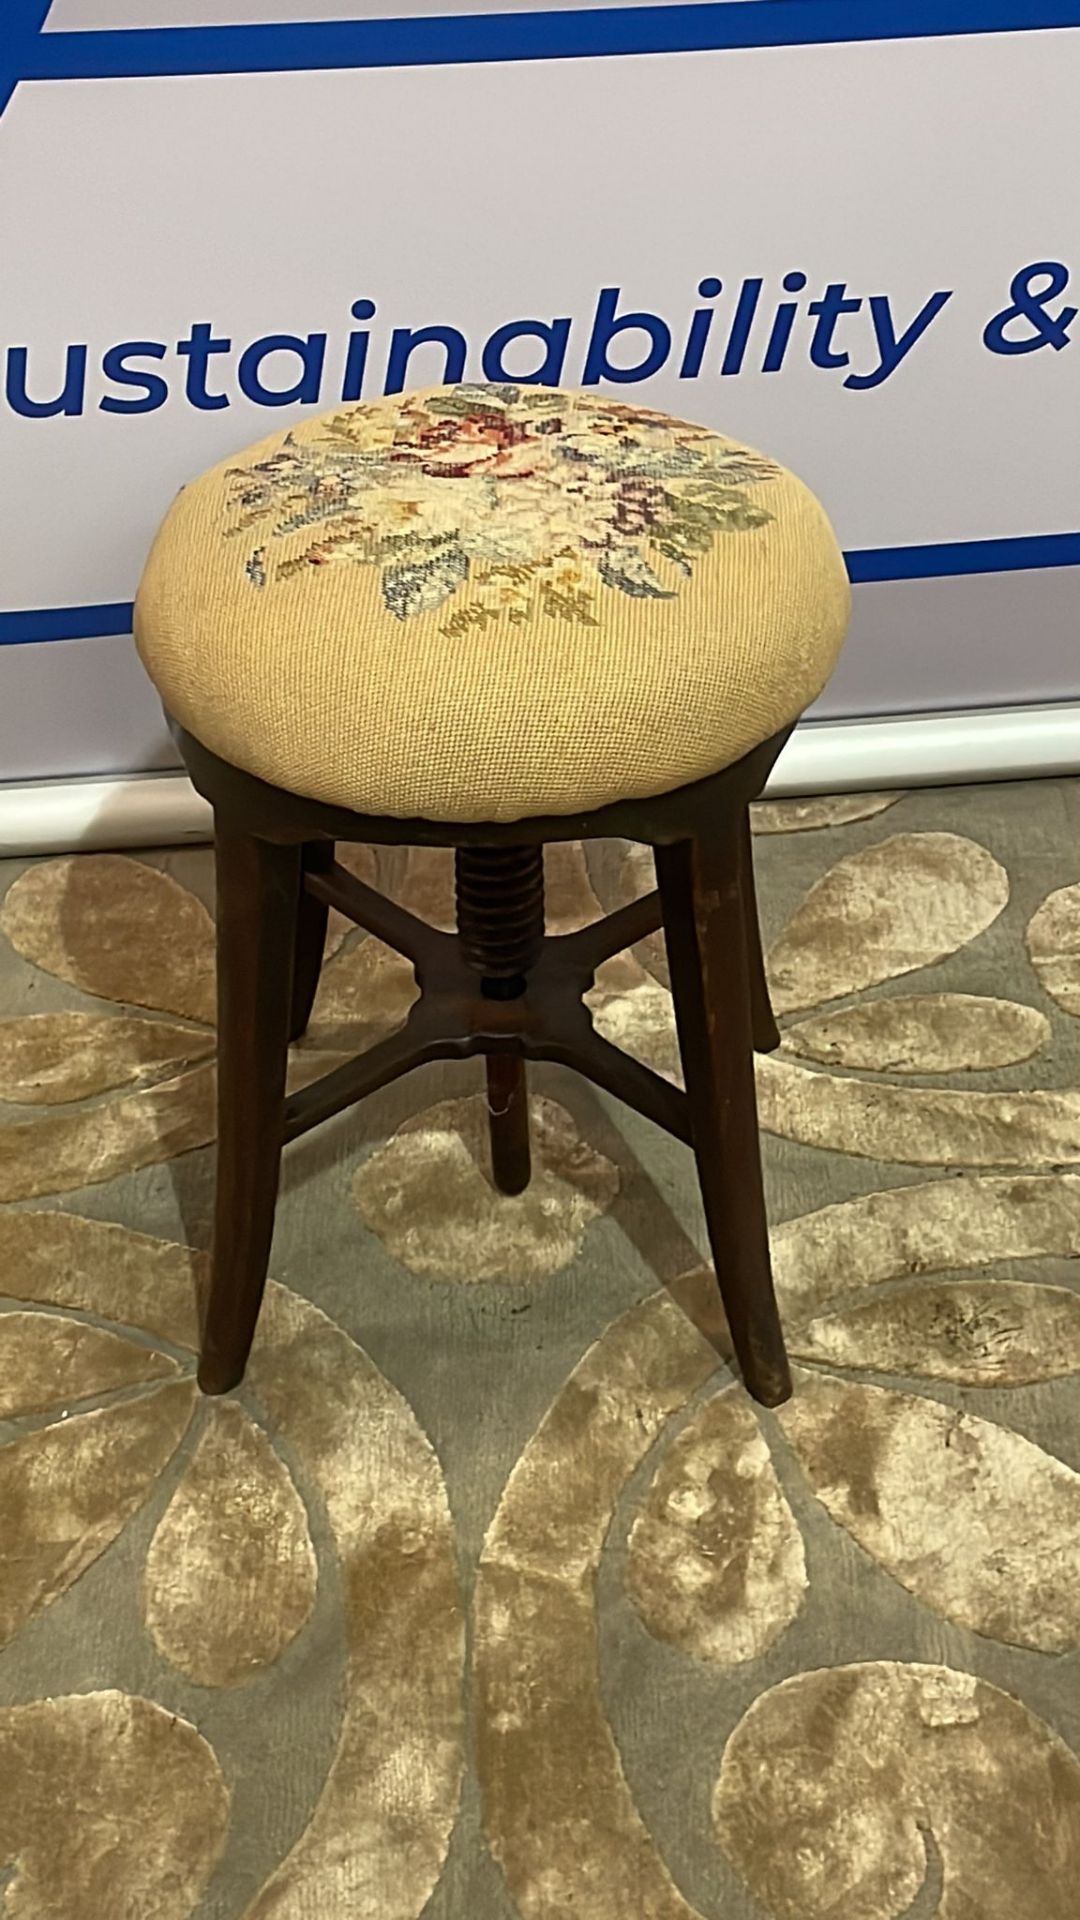 A Milk Maid Stool Finely Upholstered With A Floral Print Pad Seat 36 x 45cm - Image 2 of 4